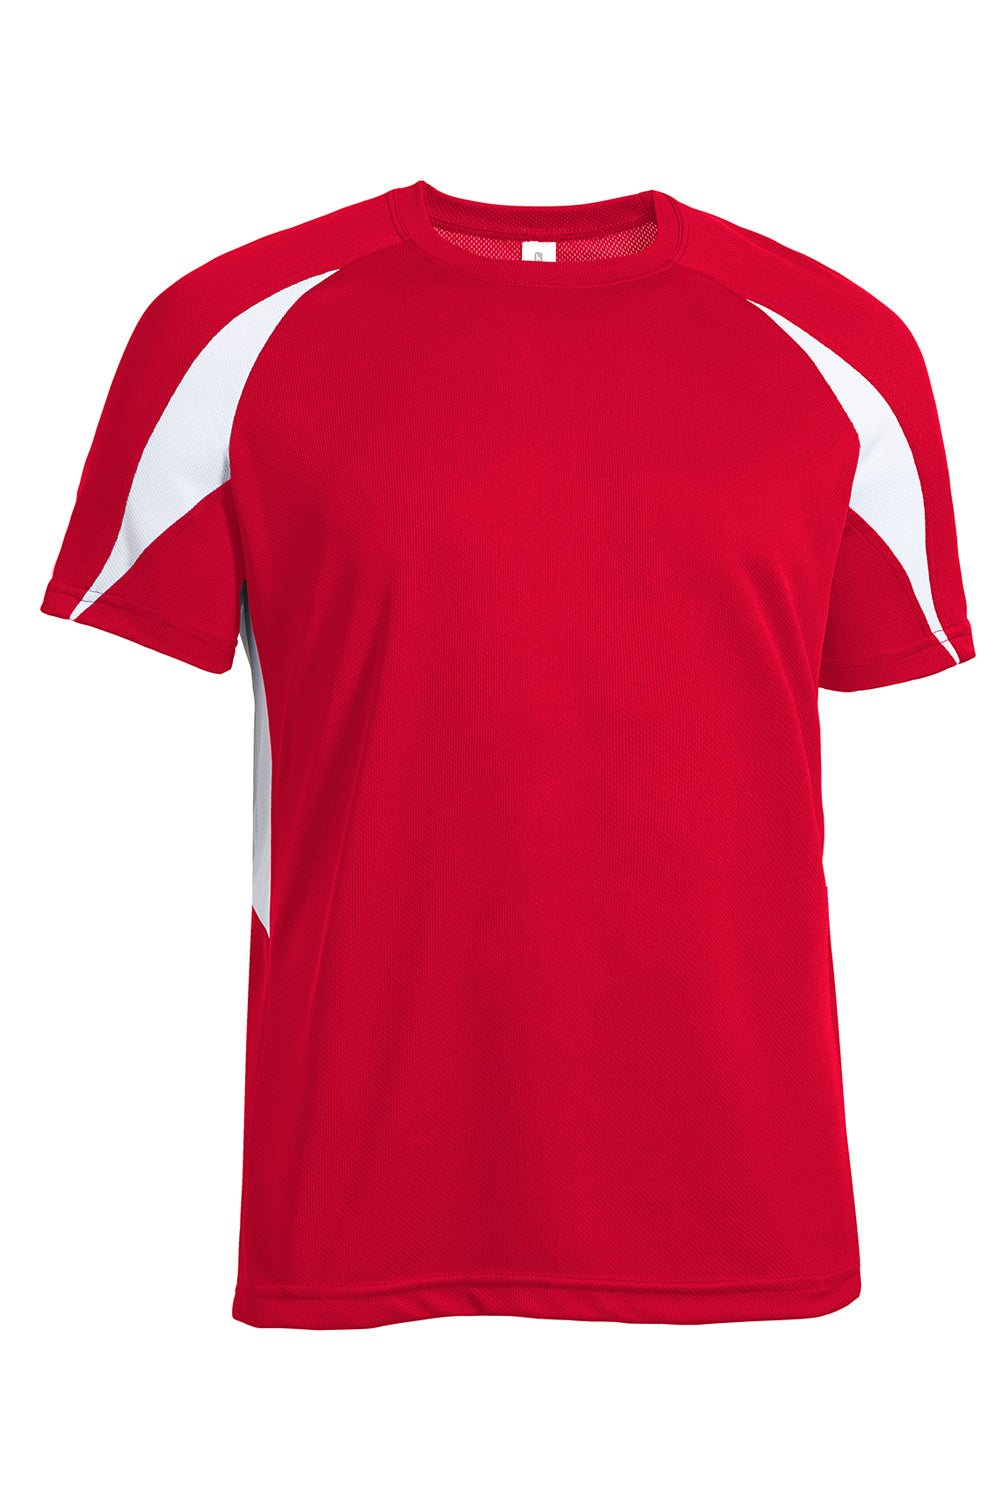 Oxymesh™ Crossroad Tee 🇺🇸 - Expert Brand Apparel#color_red-white